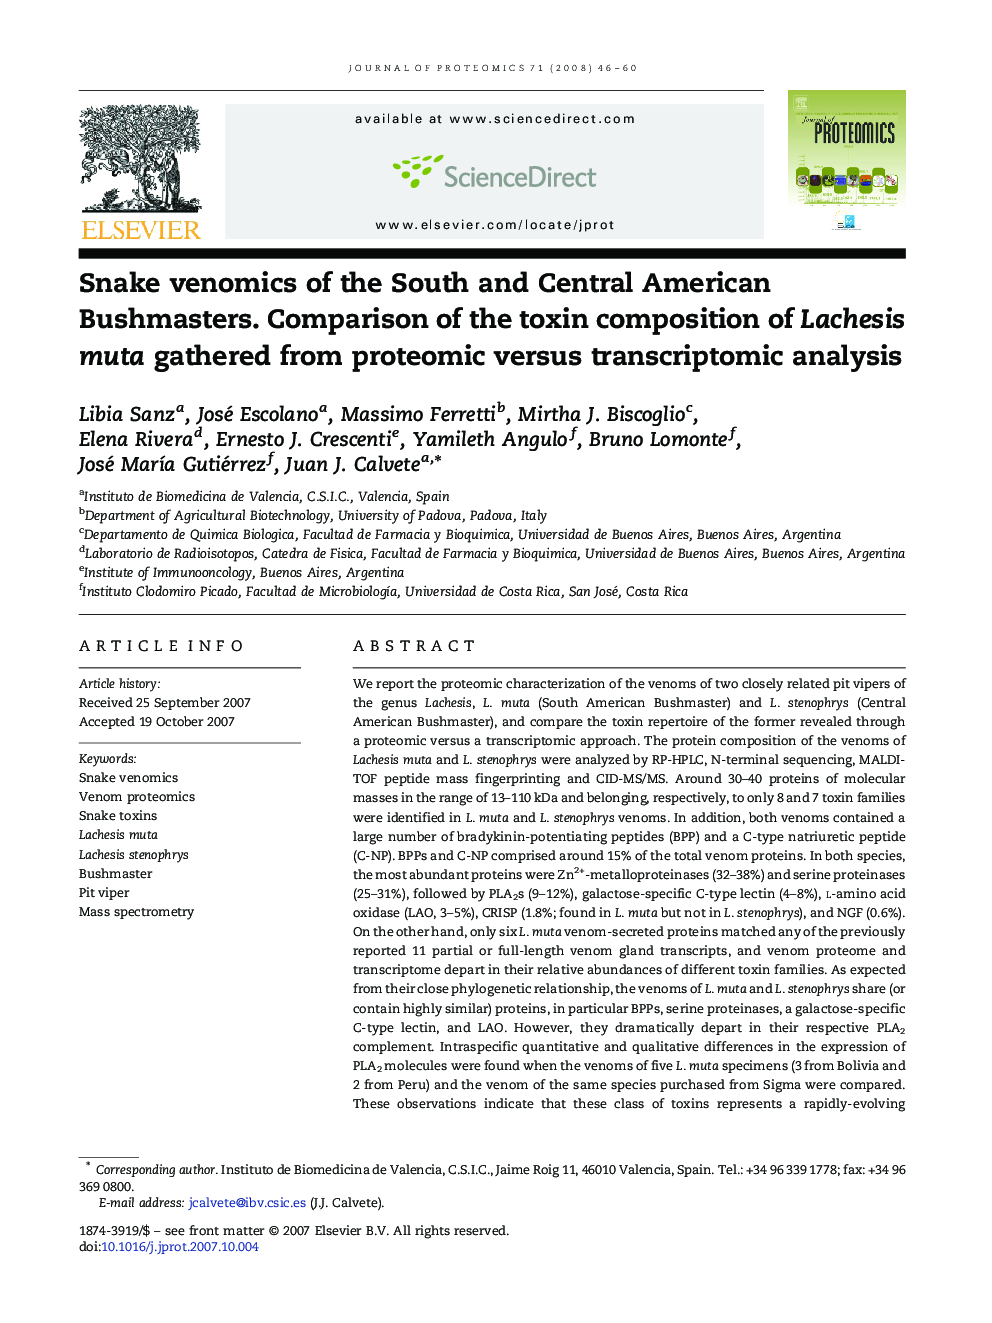 Snake venomics of the South and Central American Bushmasters. Comparison of the toxin composition of Lachesis muta gathered from proteomic versus transcriptomic analysis